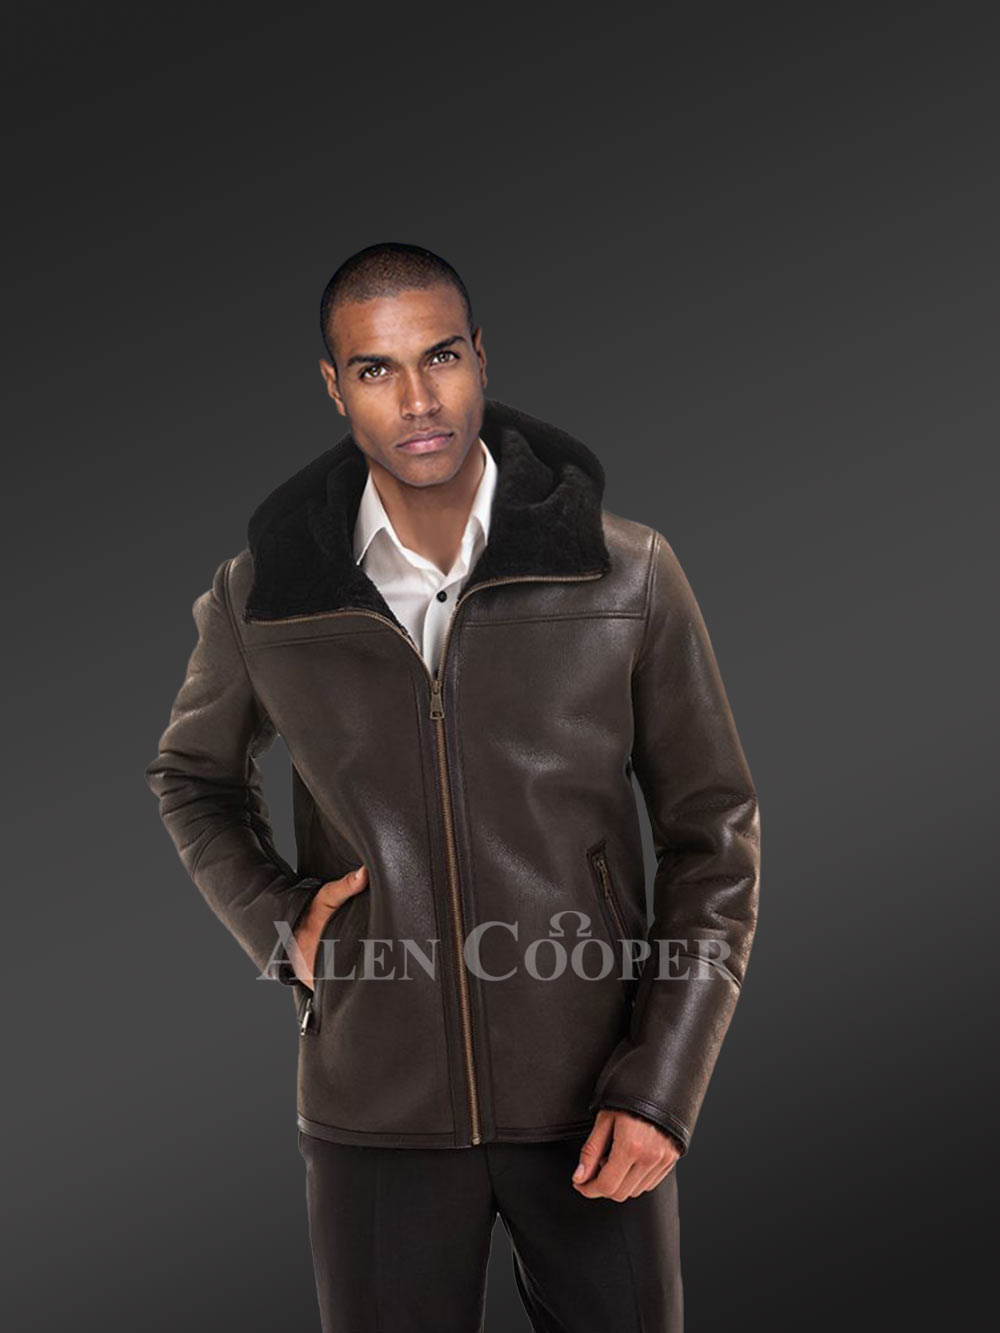 Men’s Real Stylish Shearling Jackets in Coffee